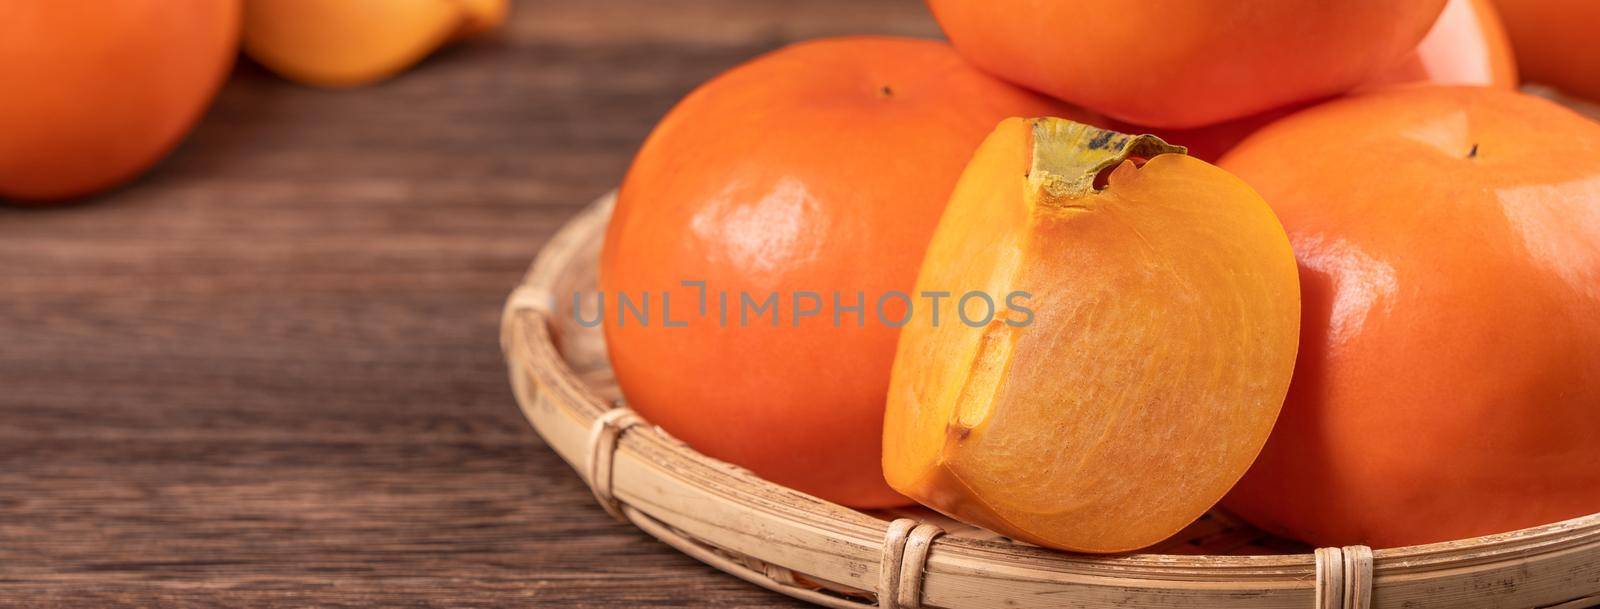 Fresh, beautiful orange color persimmon kaki on bamboo sieve over dark wooden table. Seasonal, traditional fruit of Chinese lunar new year, close up.